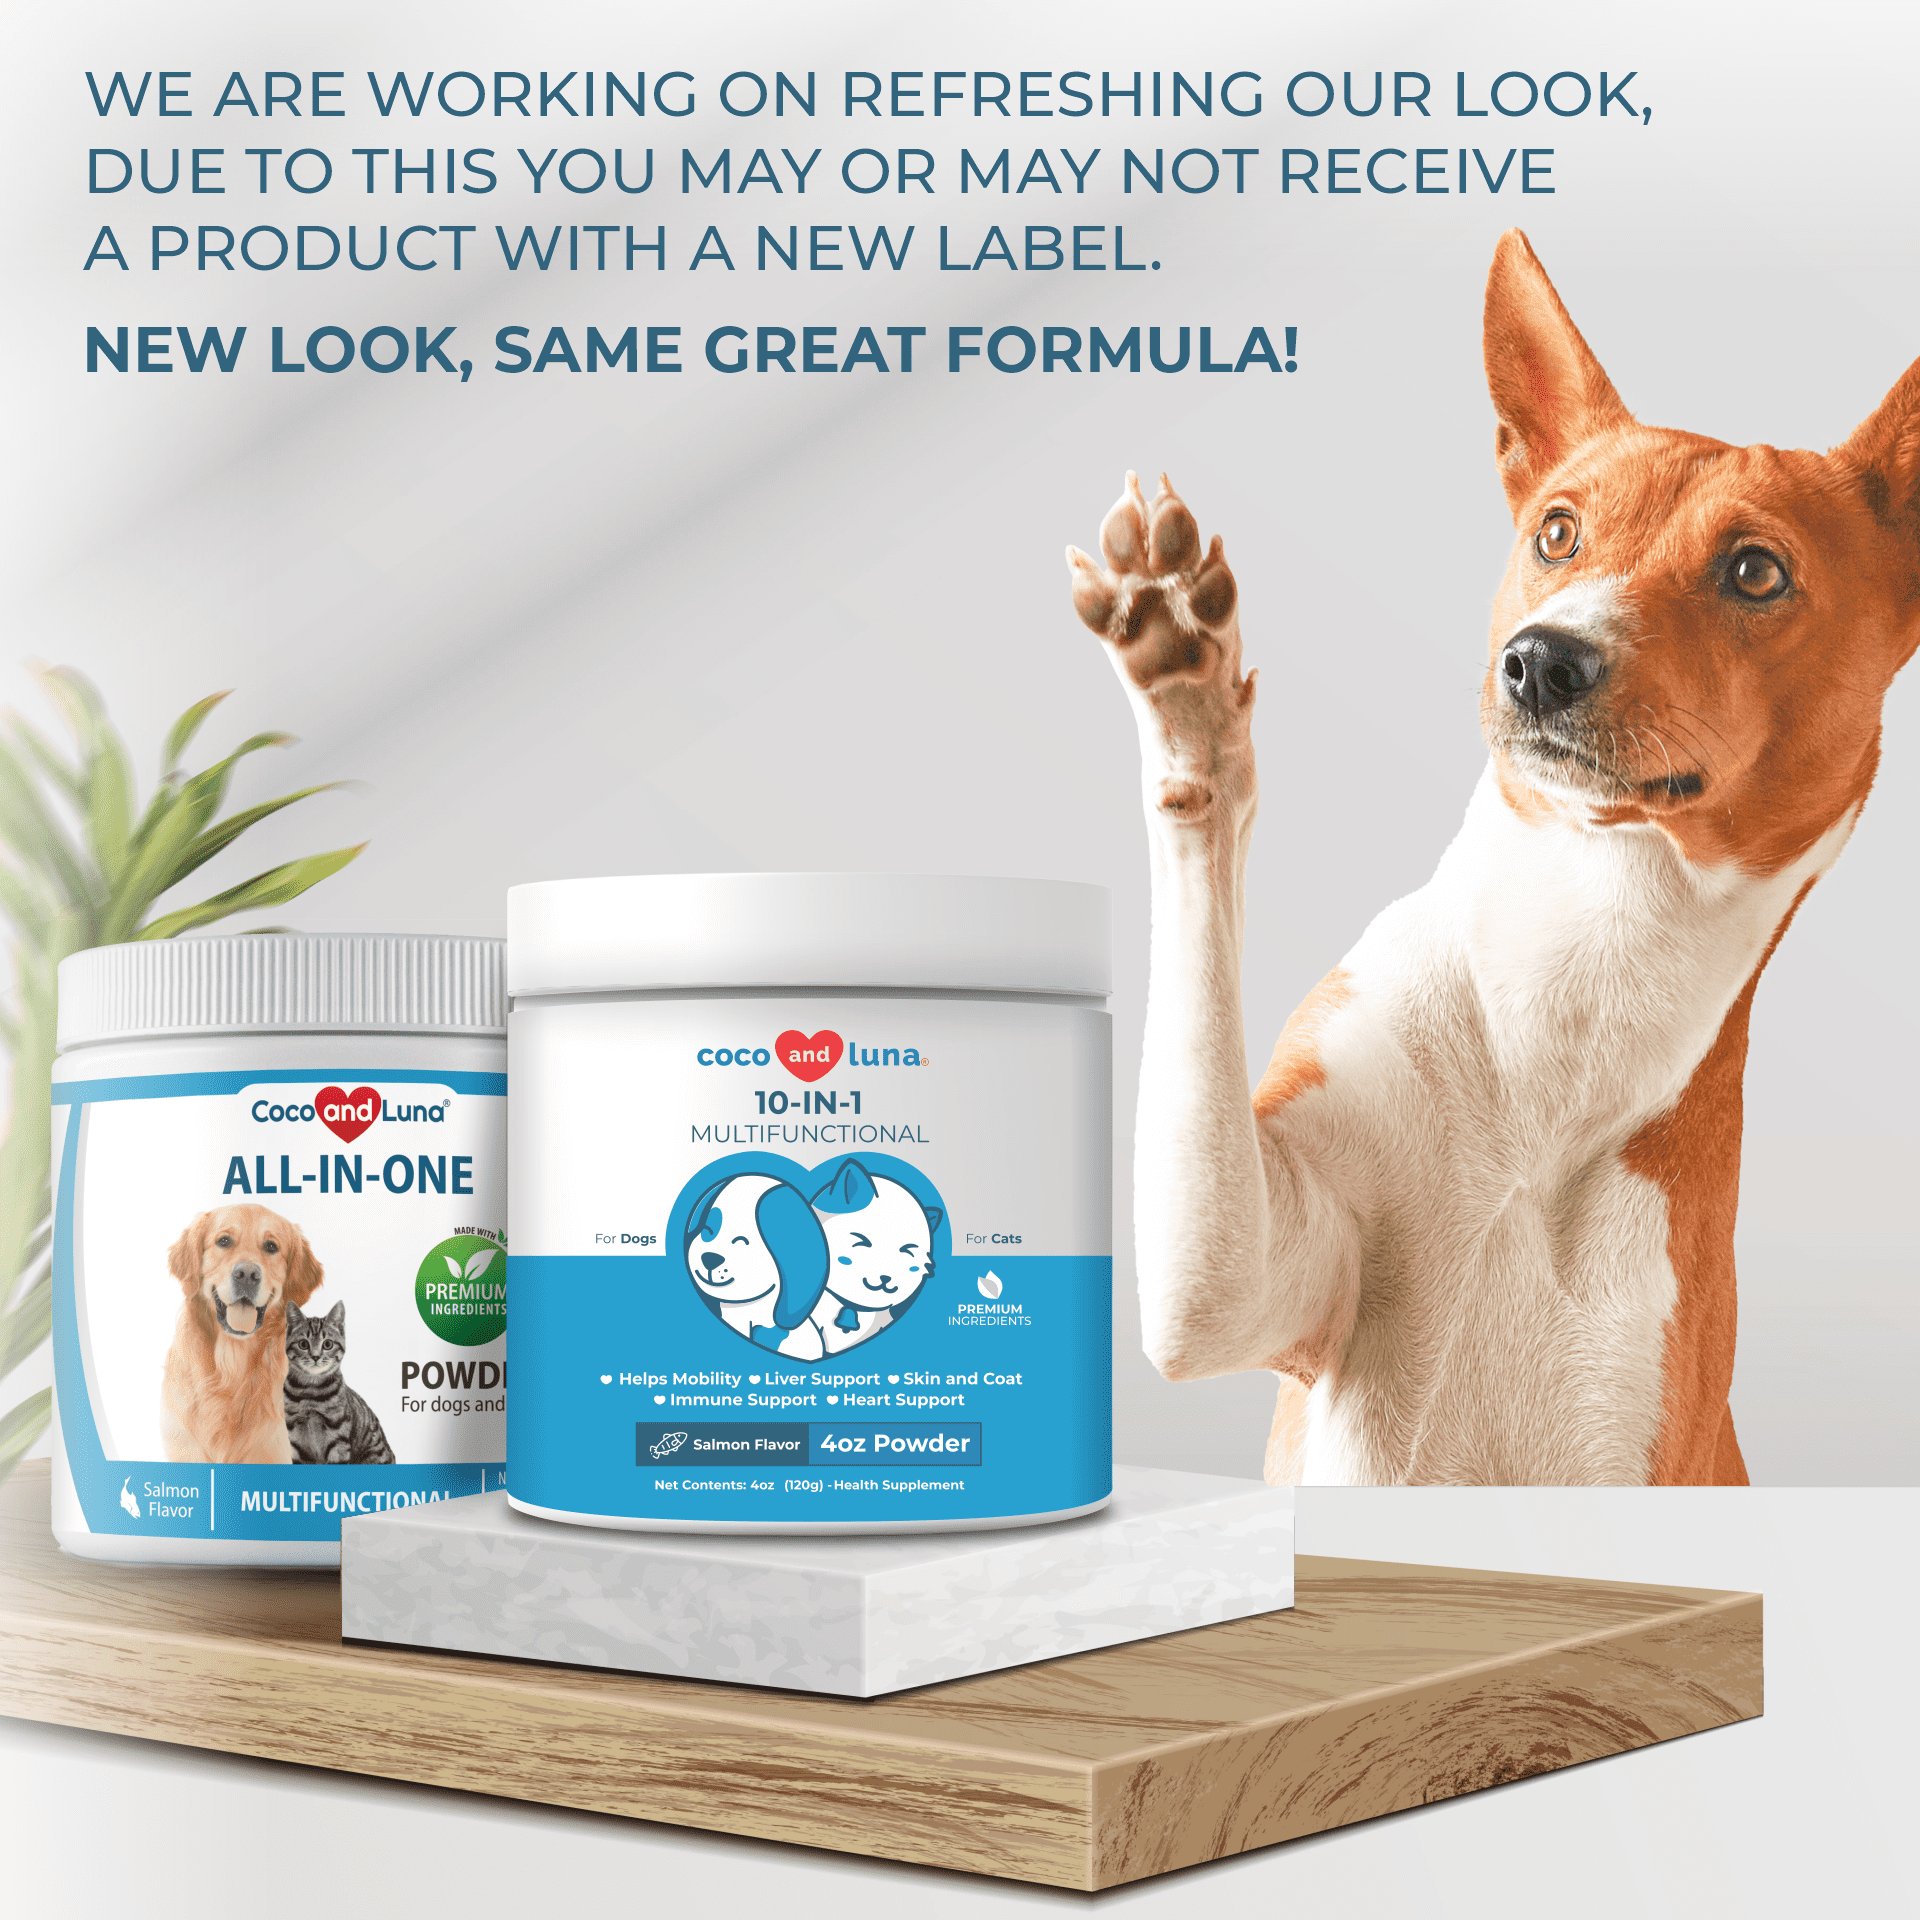 10 in 1 Multivitamin for Dogs and Cats - 4 oz Powder - Coco and Luna